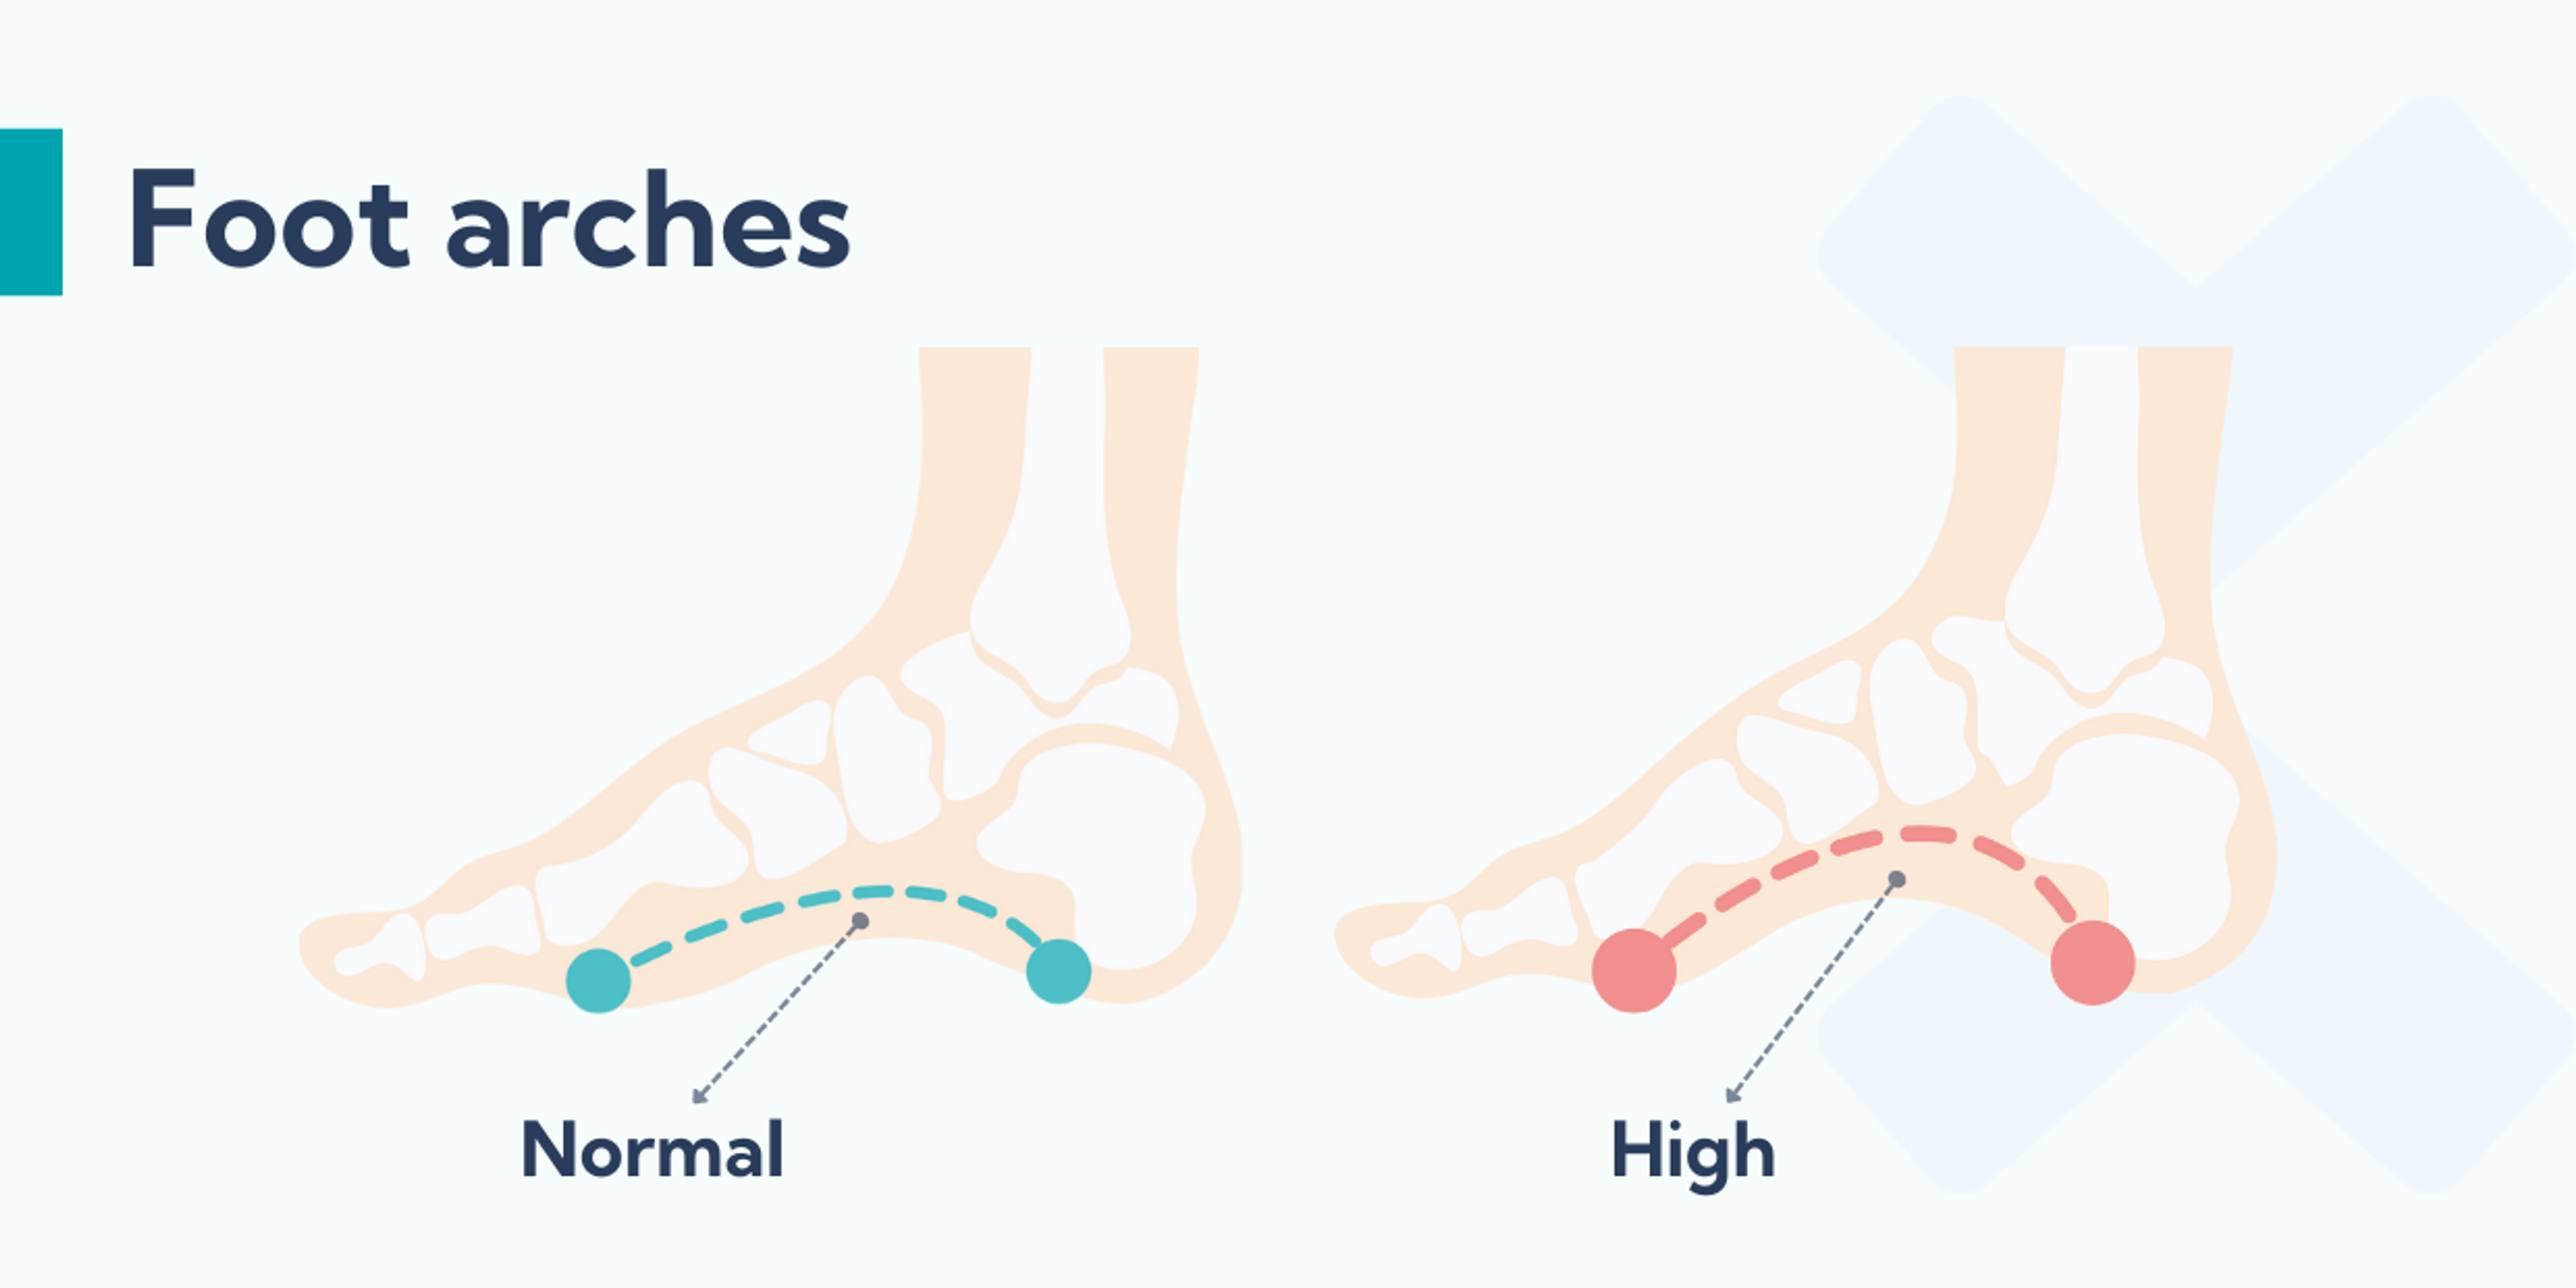 High foot arches can predispose you to getting insertional Achilles tendonitis.